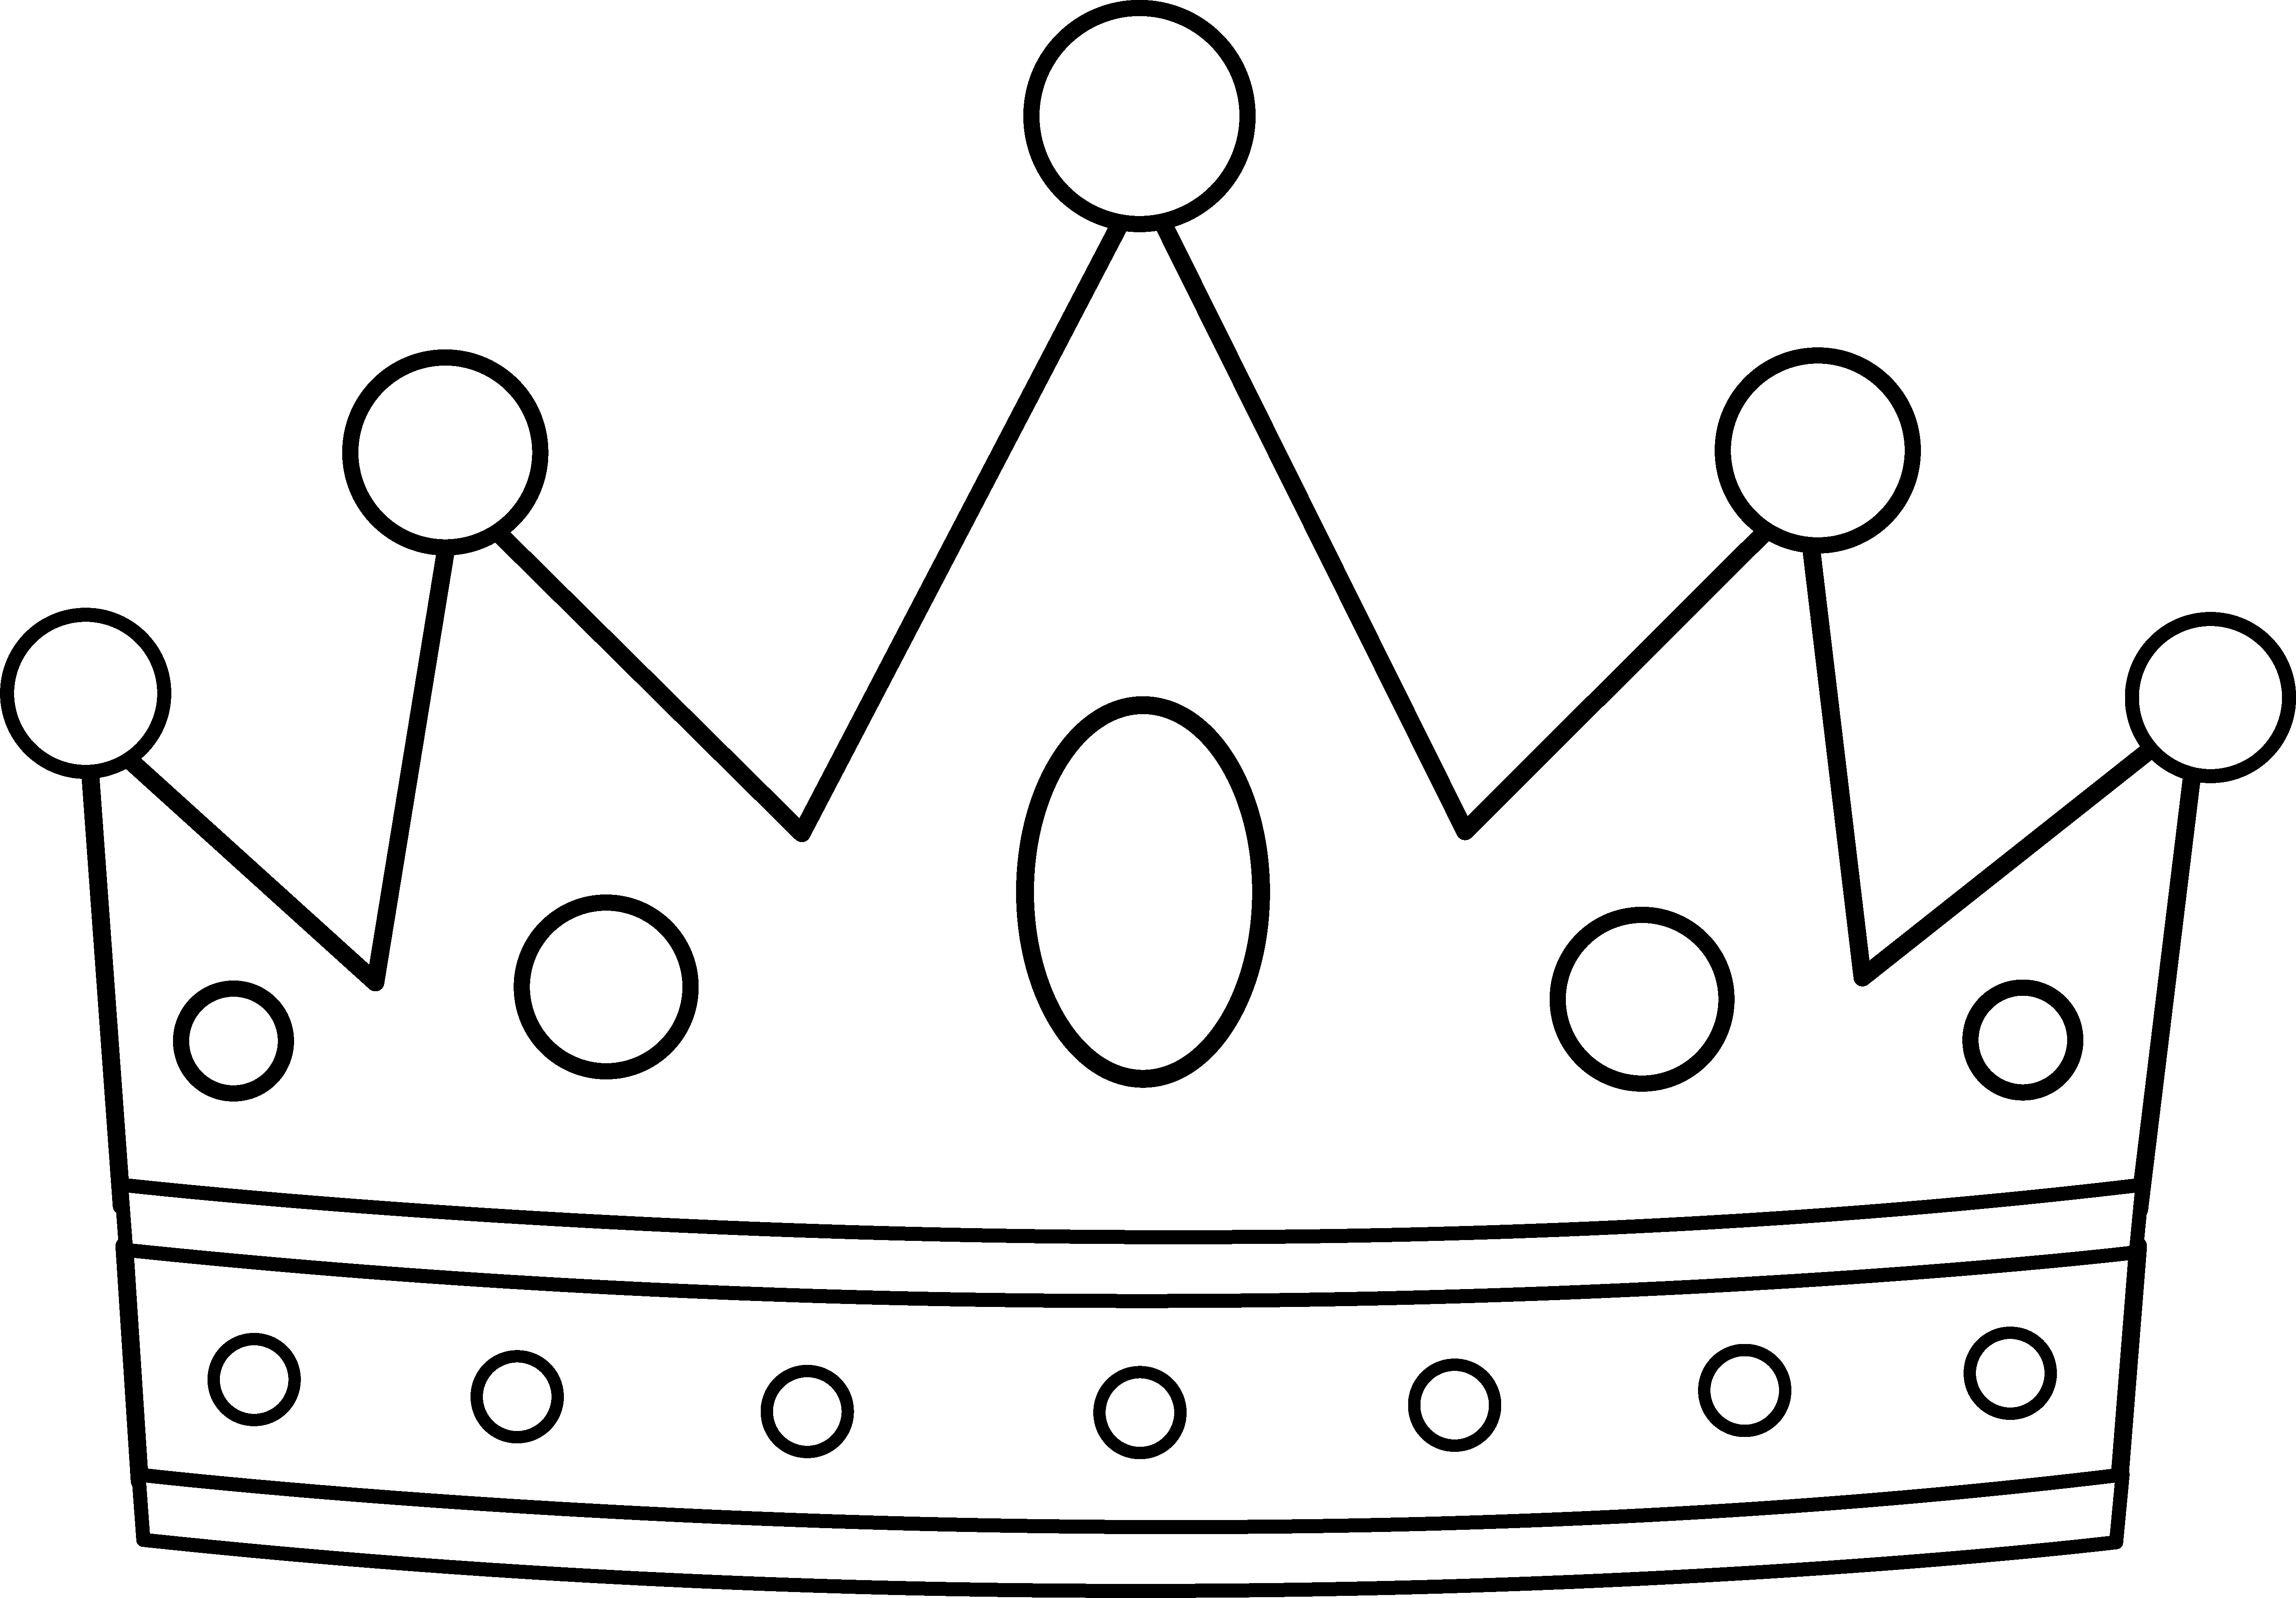 Clipart king crown